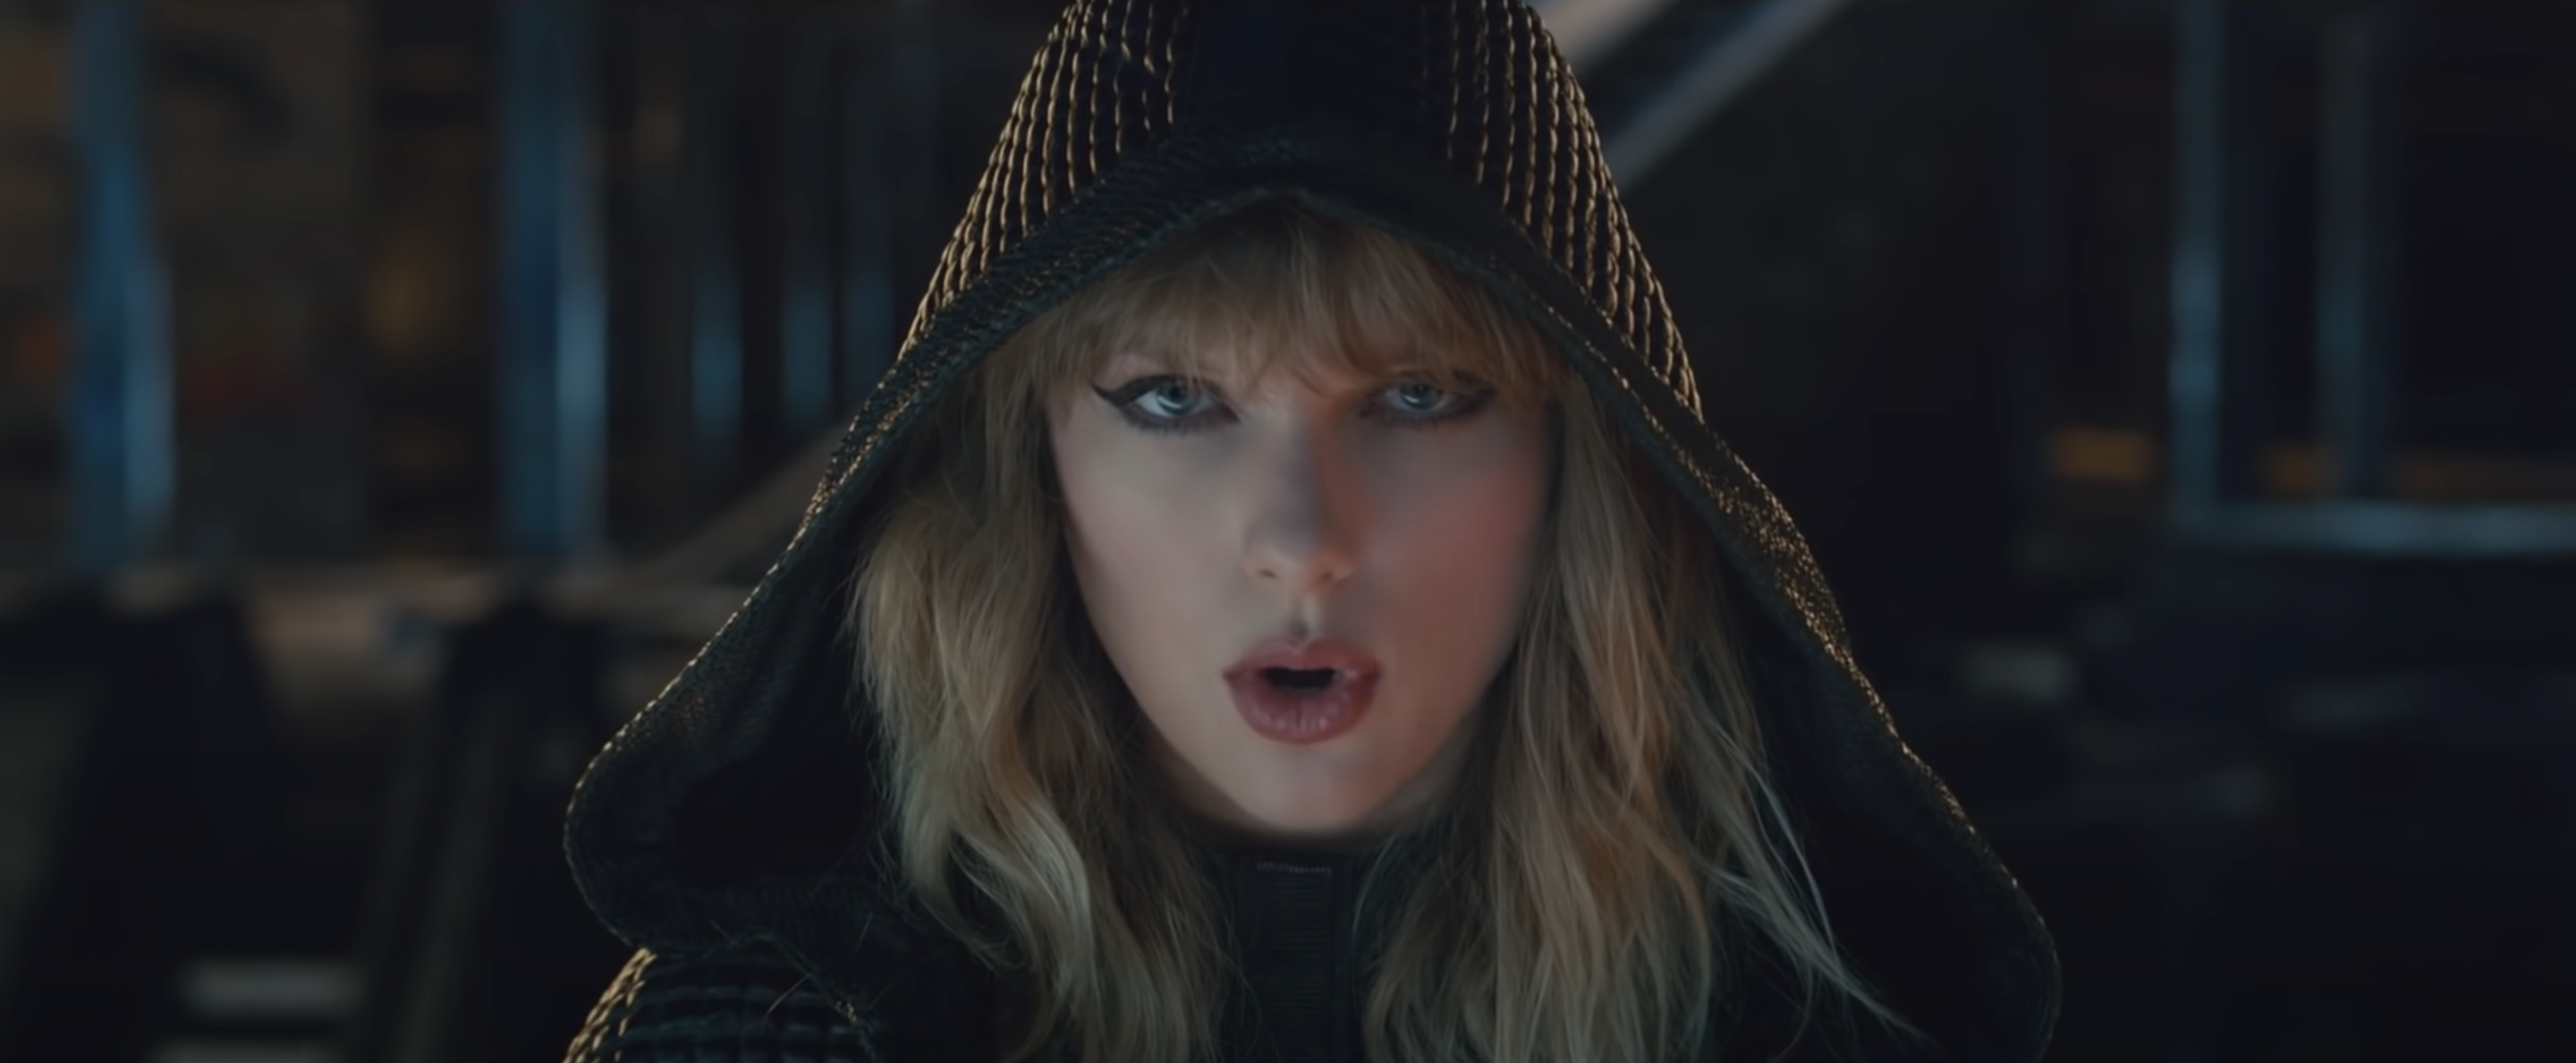 Taylor Swift with a black hood on looking at the camera.